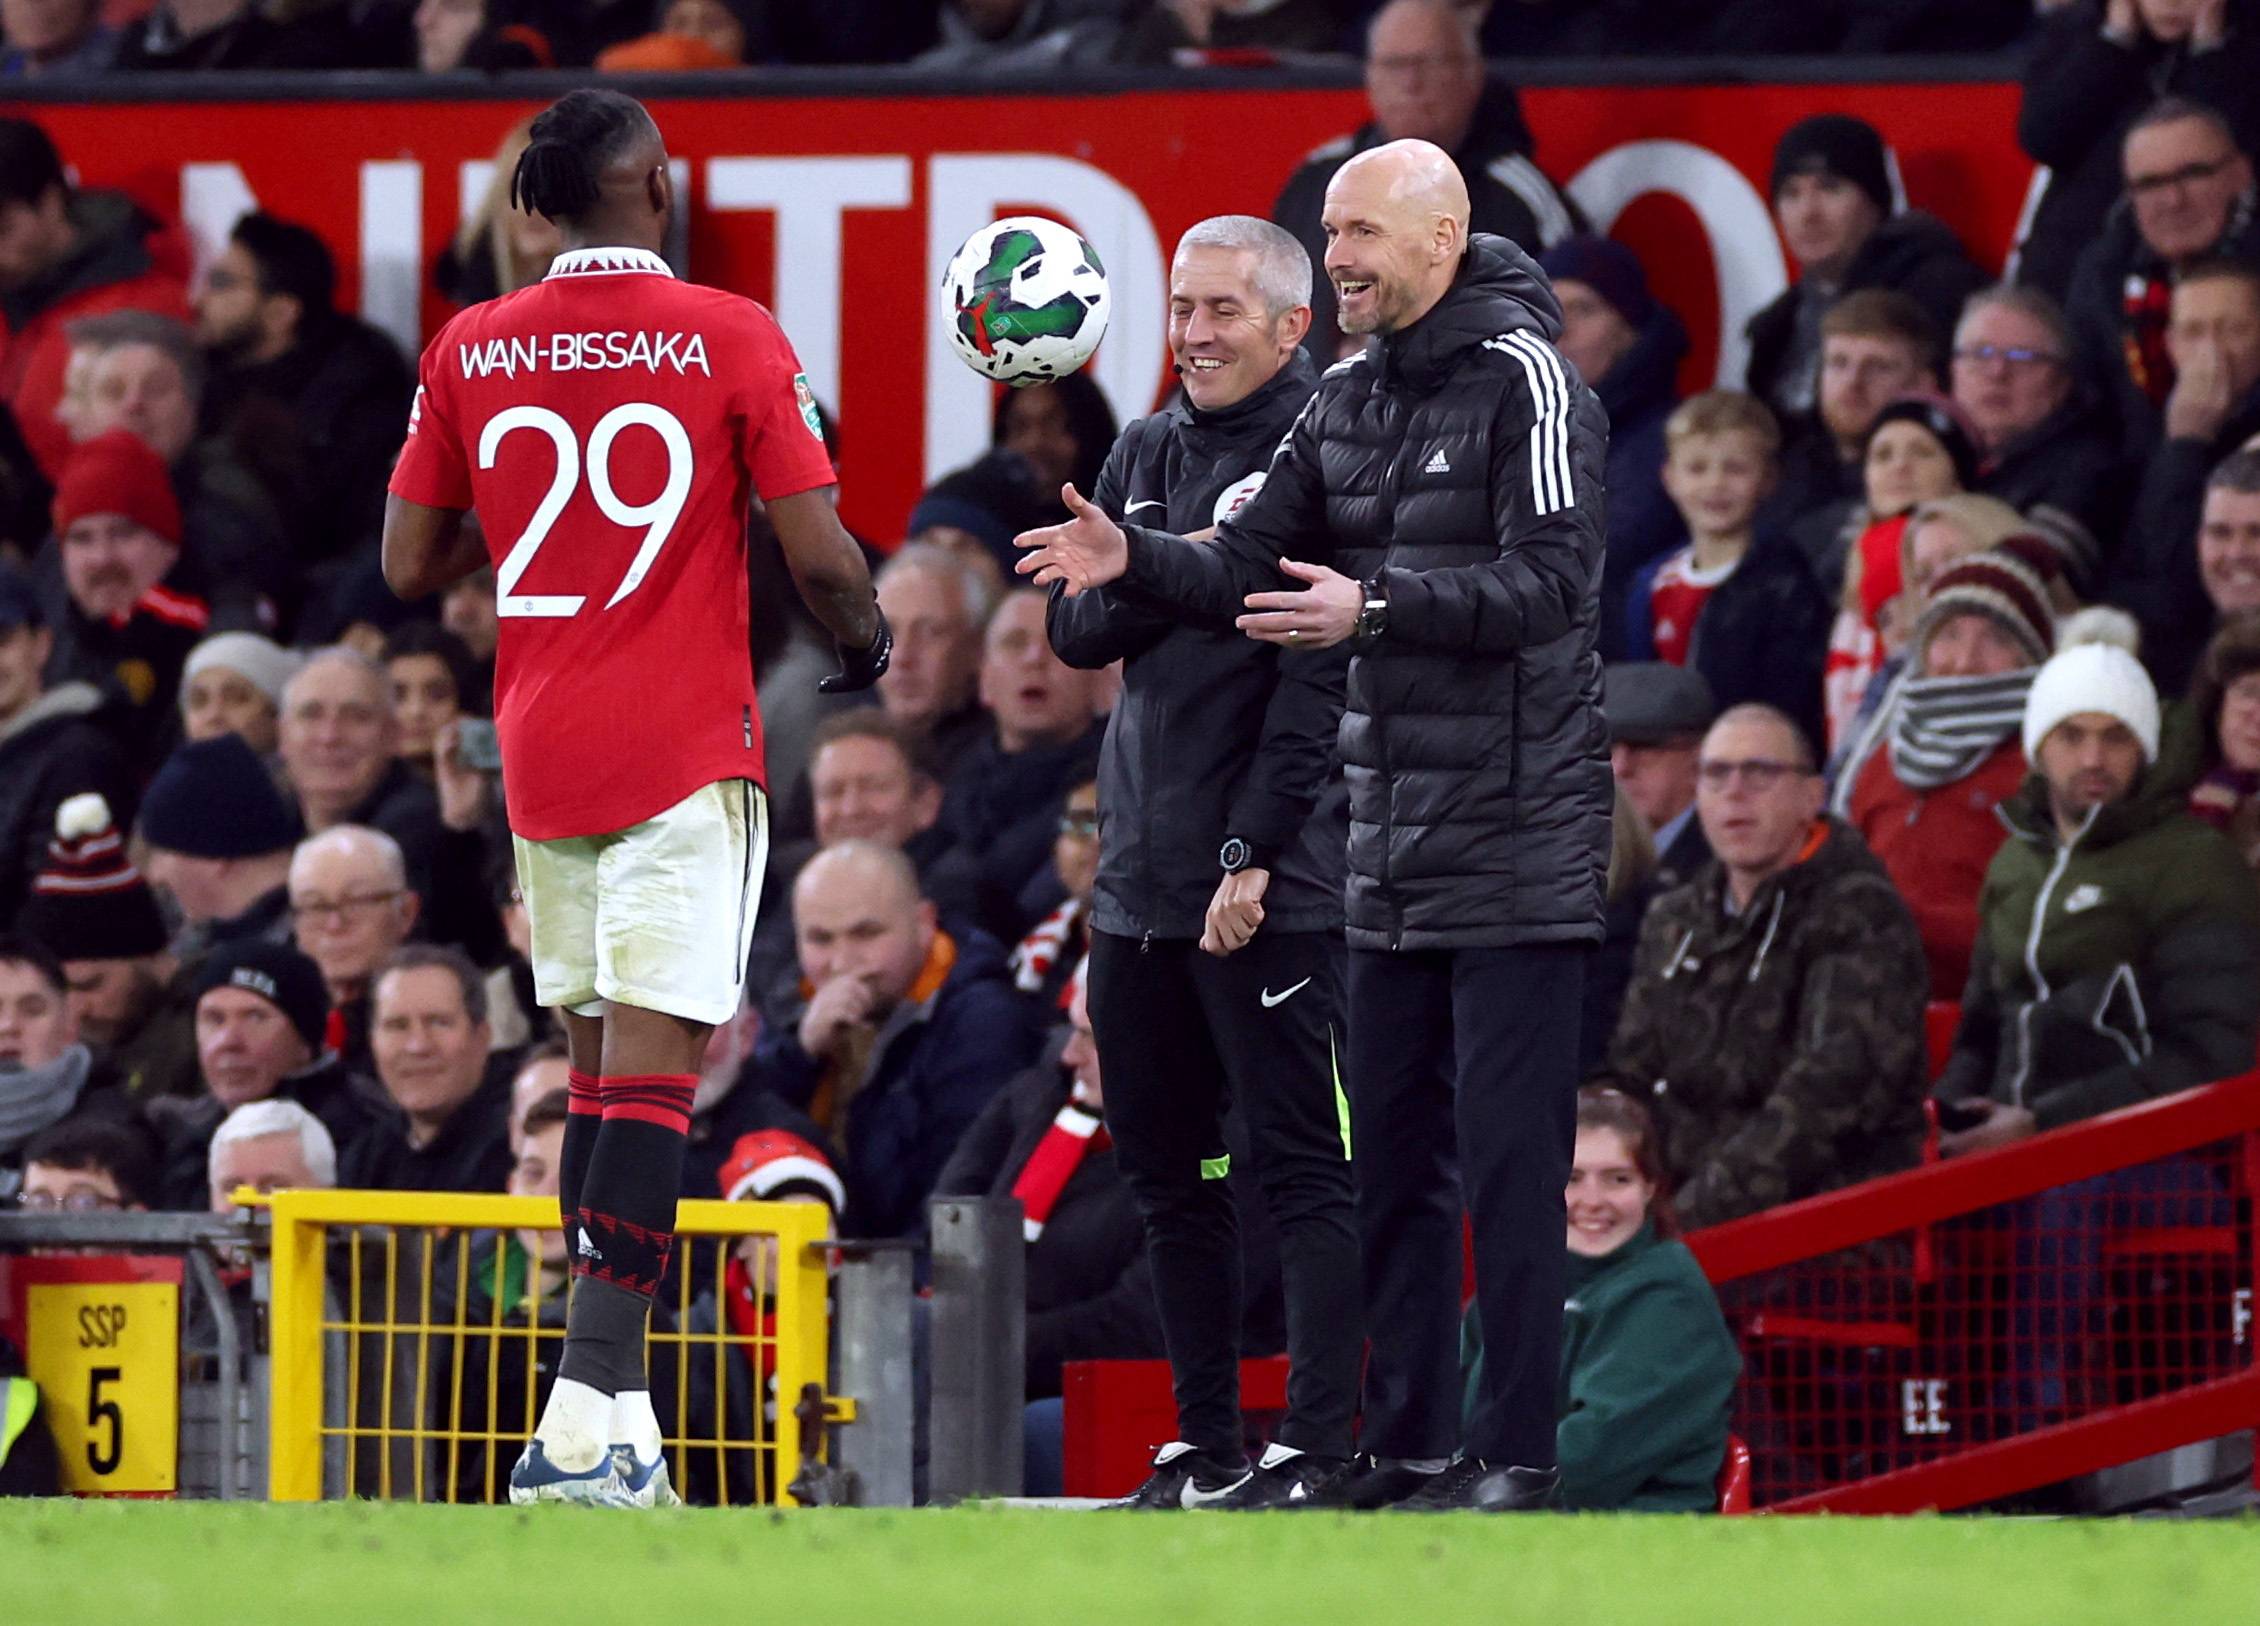 Manchester United: Aaron Wan-Bissaka could still leave - Follow up